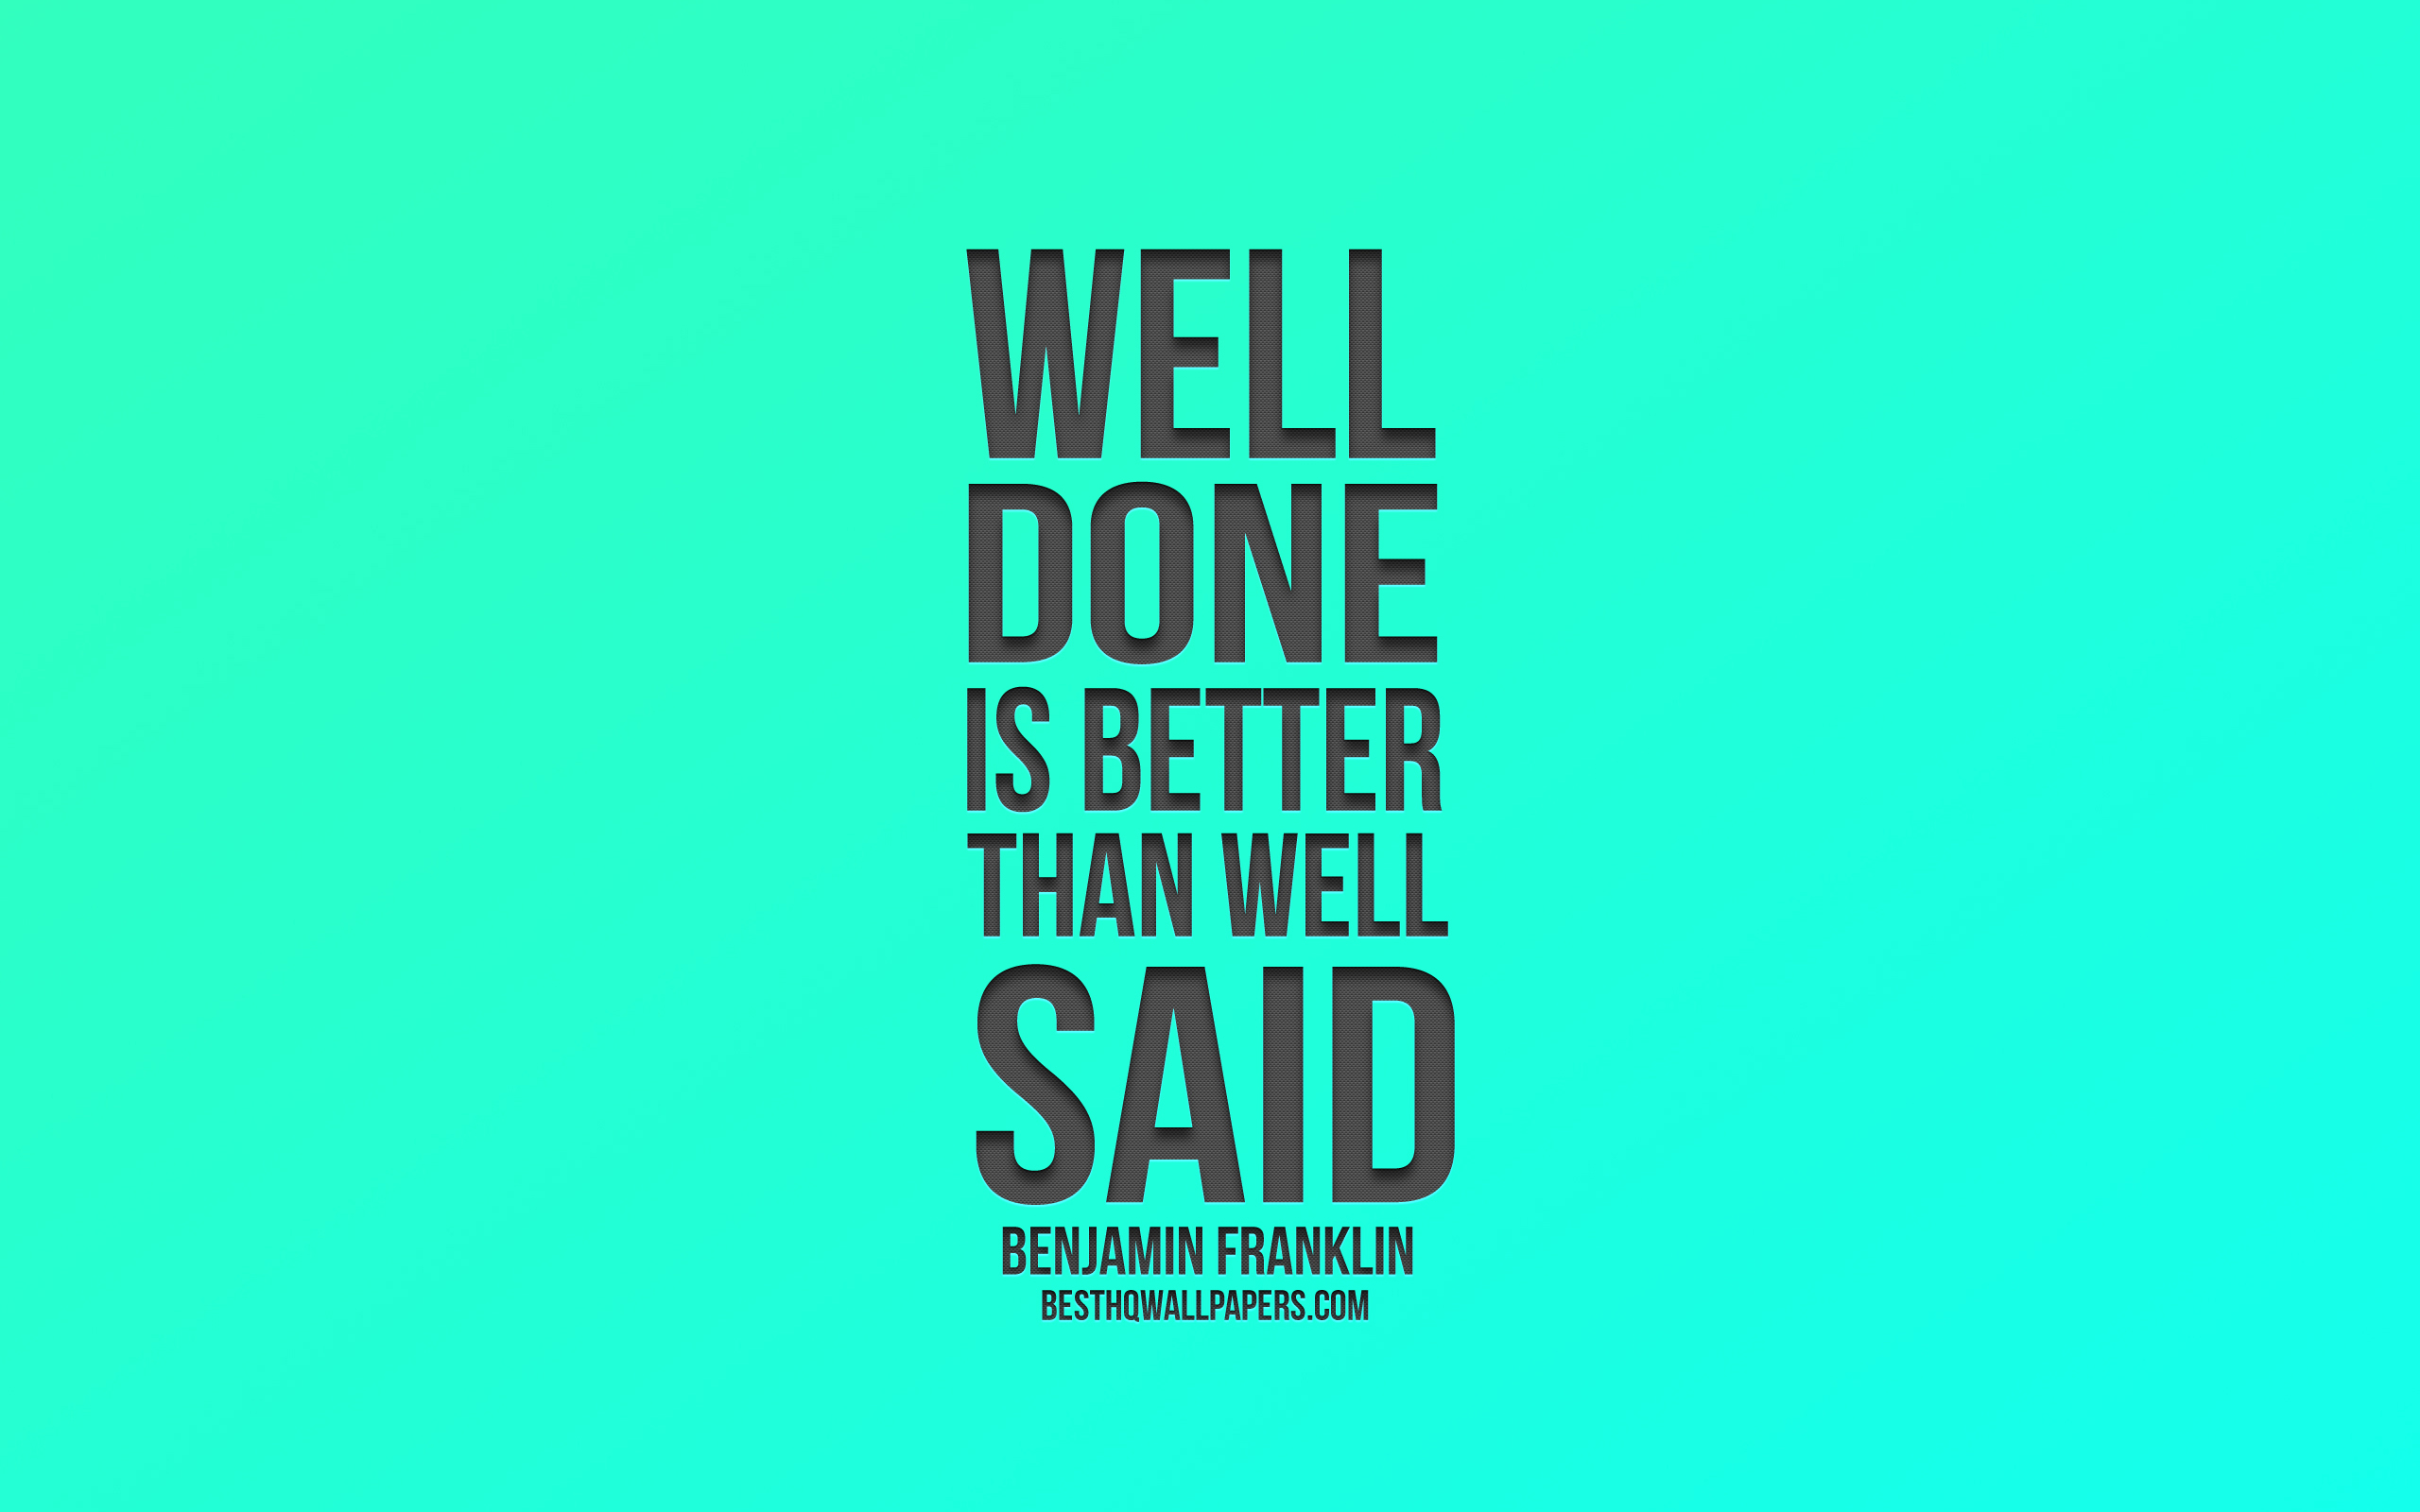 Download wallpapers Well done is better than well said Benjamin